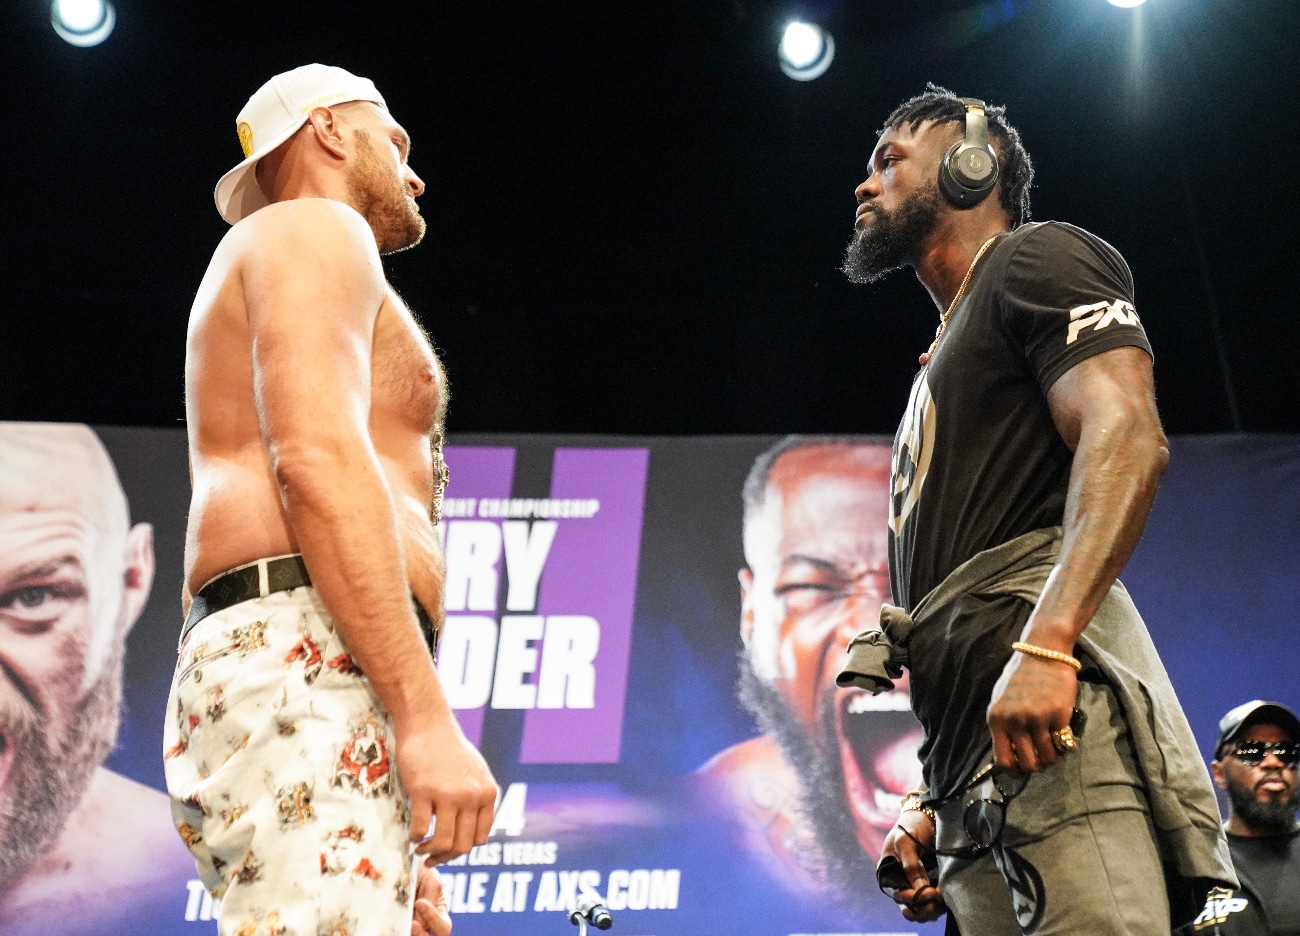 Image: Buddy McGirt warns Deontay Wilder on his 'Kill him' attitude for Tyson Fury trilogy on July 24th